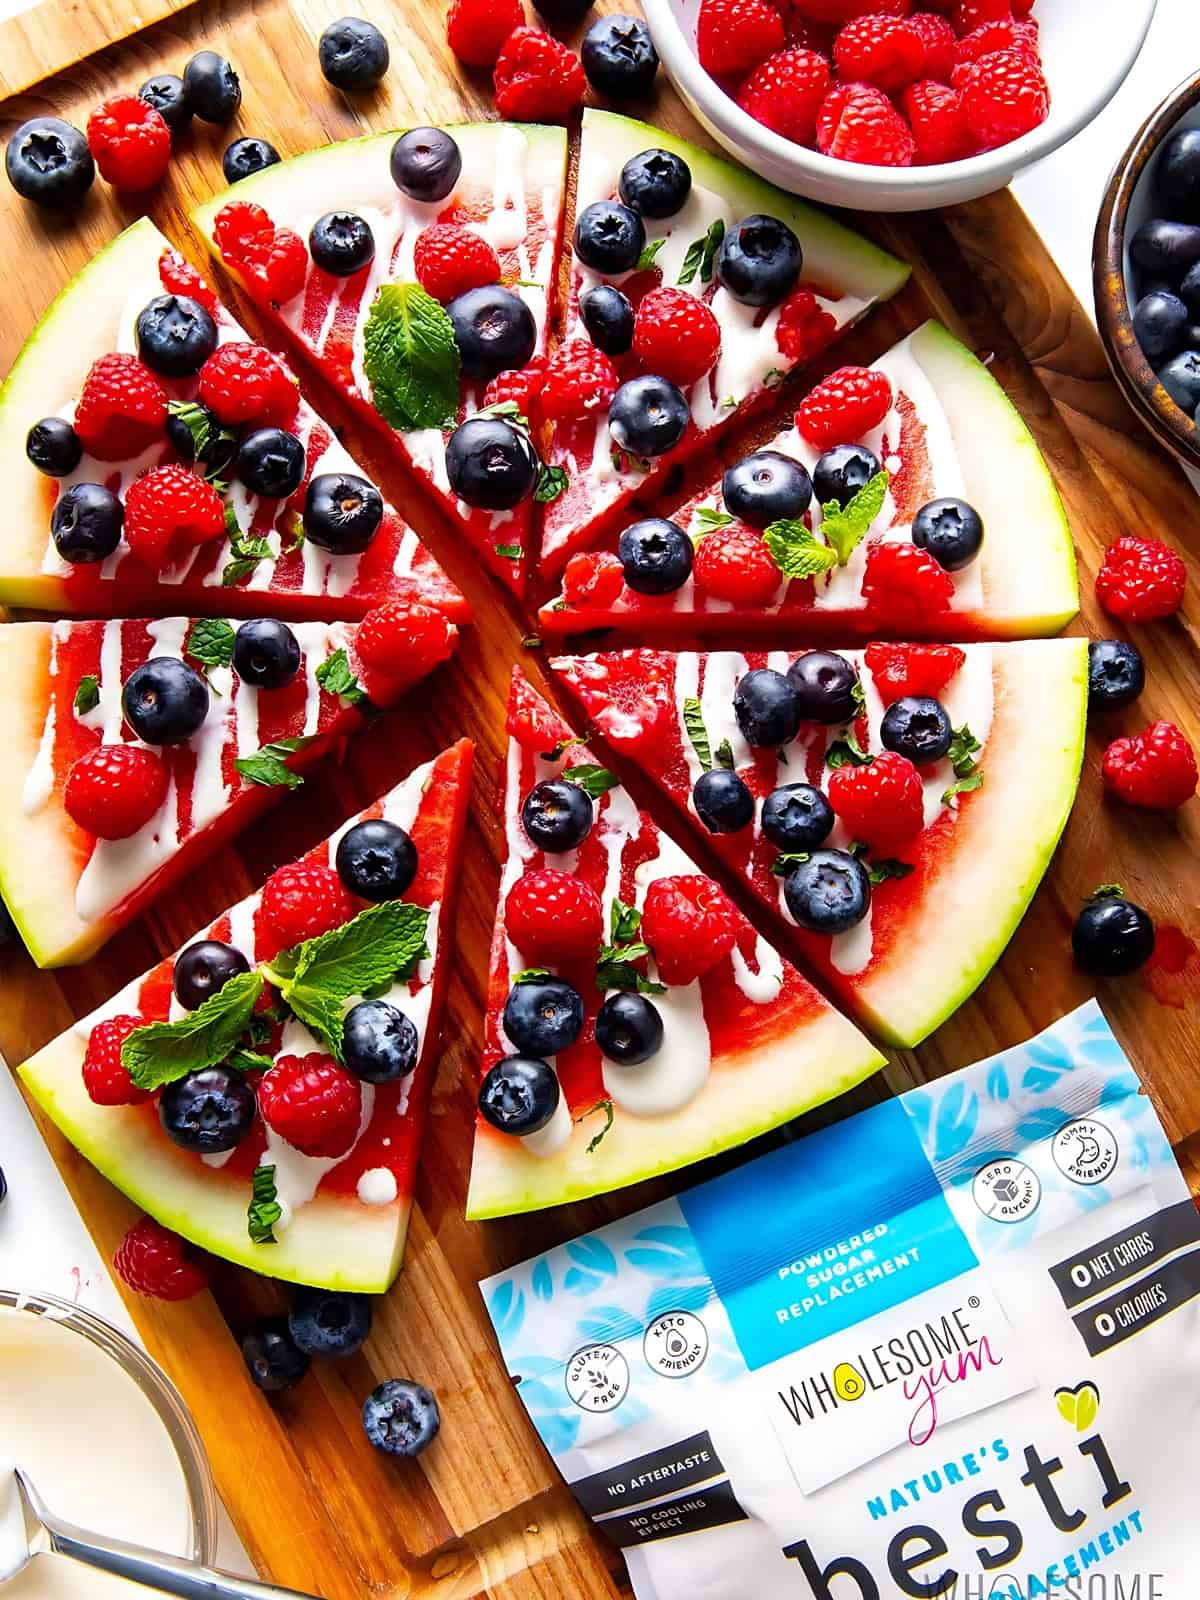 Watermelon pizza topped with blueberries and raspberries.